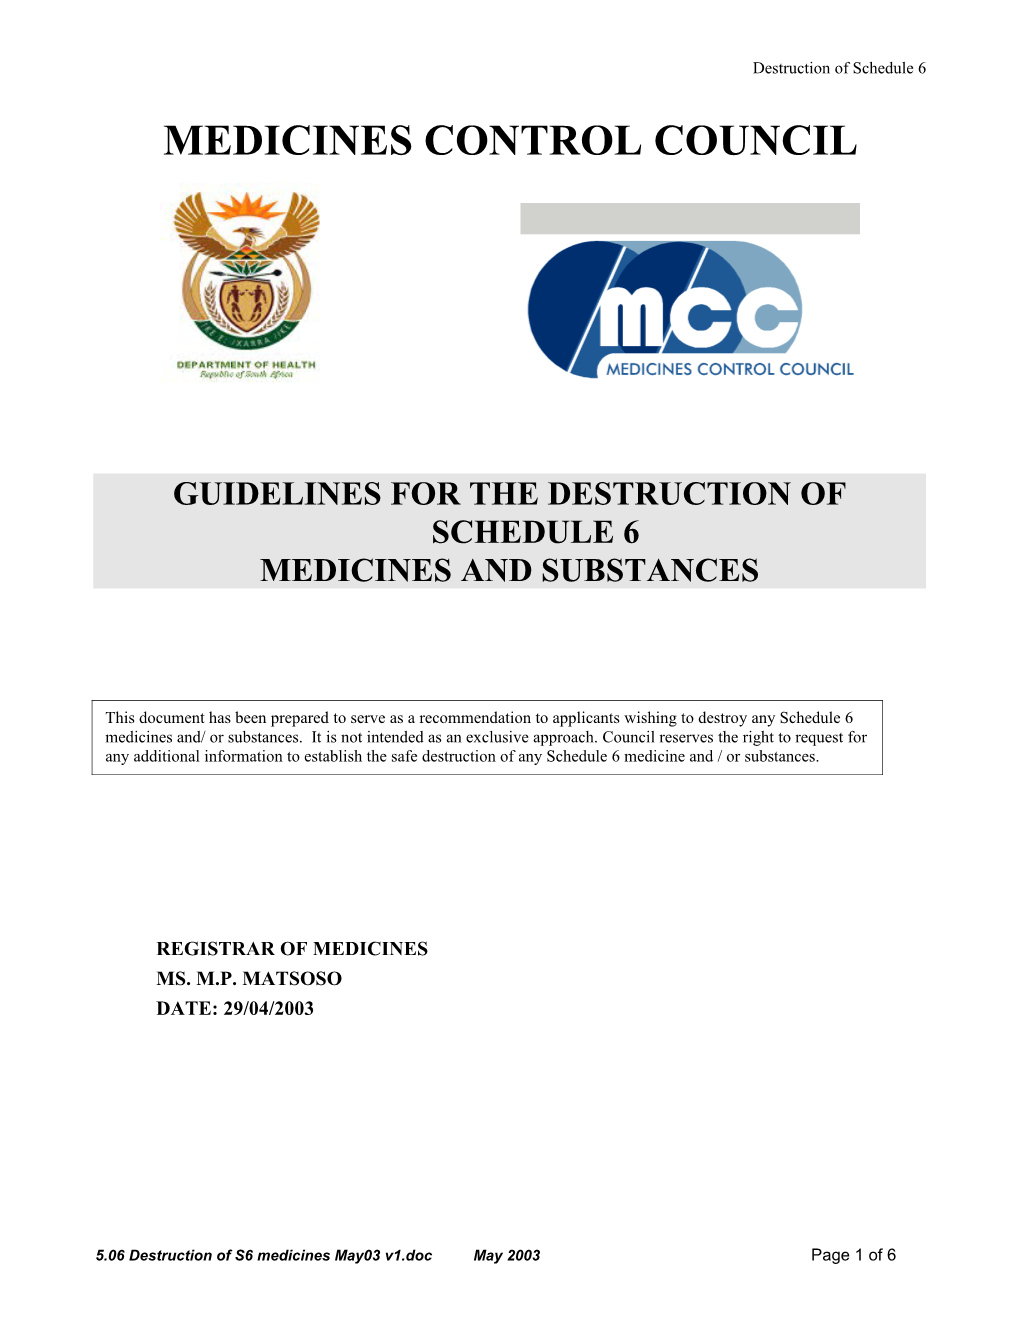 Guidelines for the Scheduling Committee of the Medicines Control Council